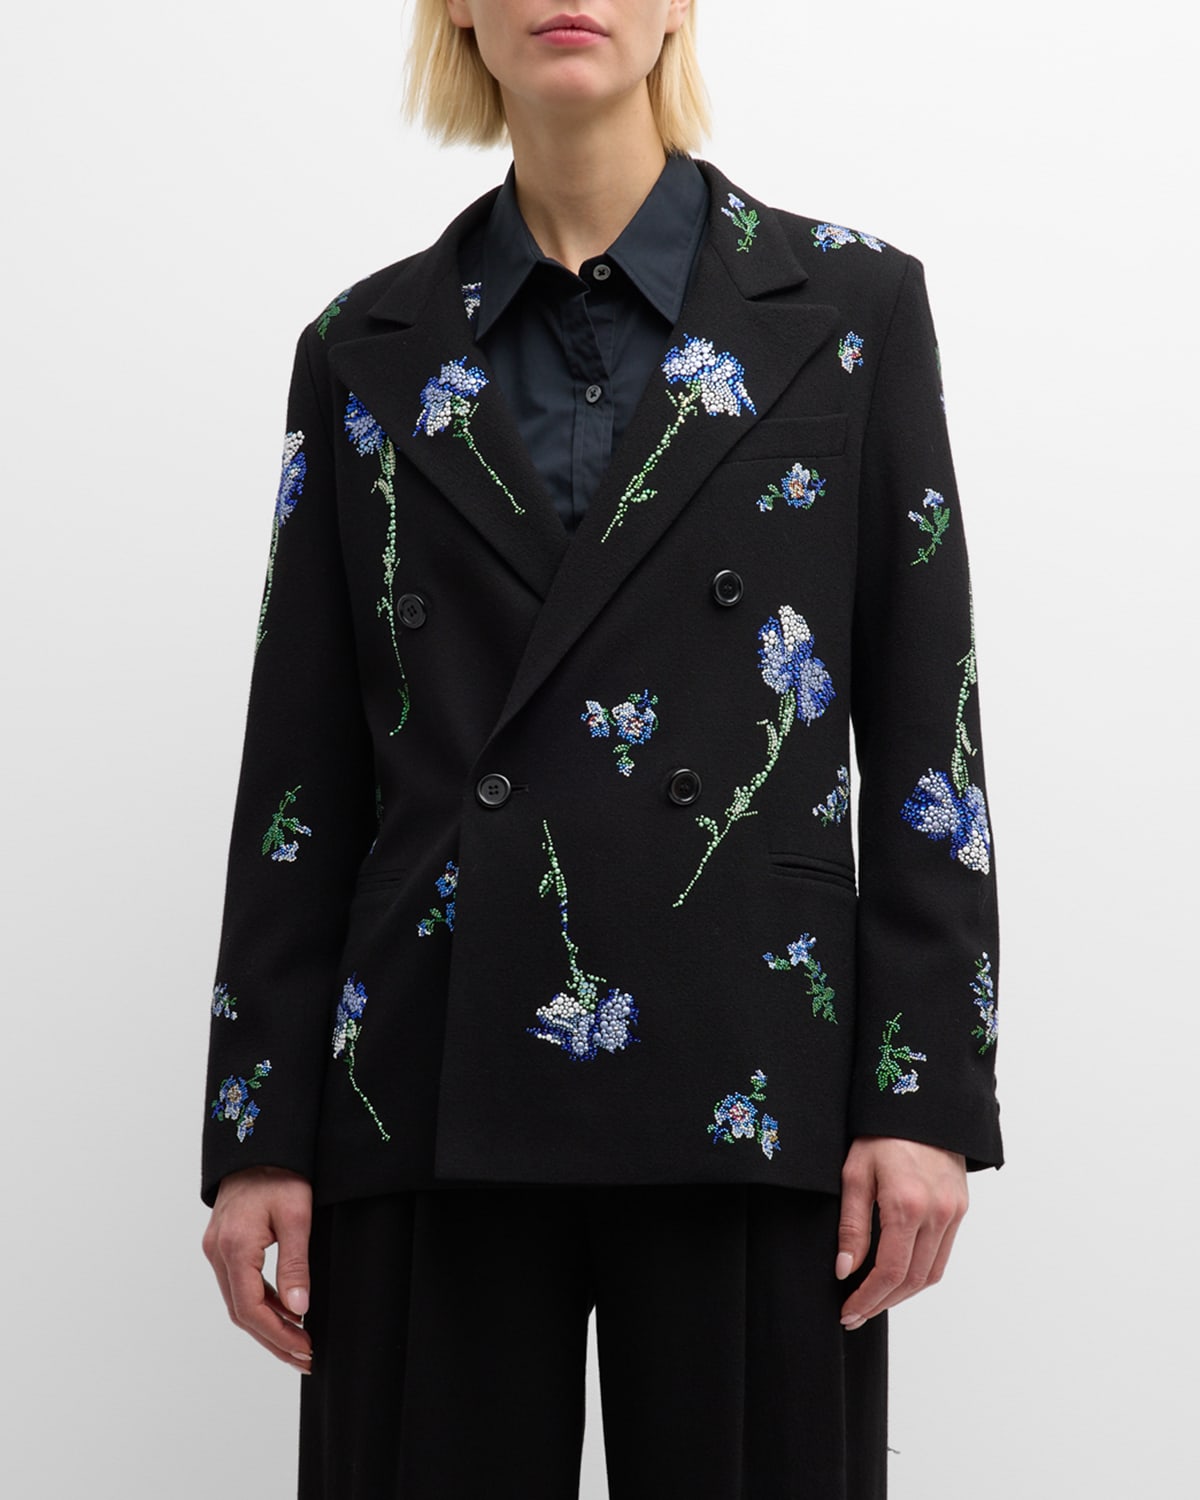 Cecil Beaton Carnation Embellished Double-Breasted Jacket